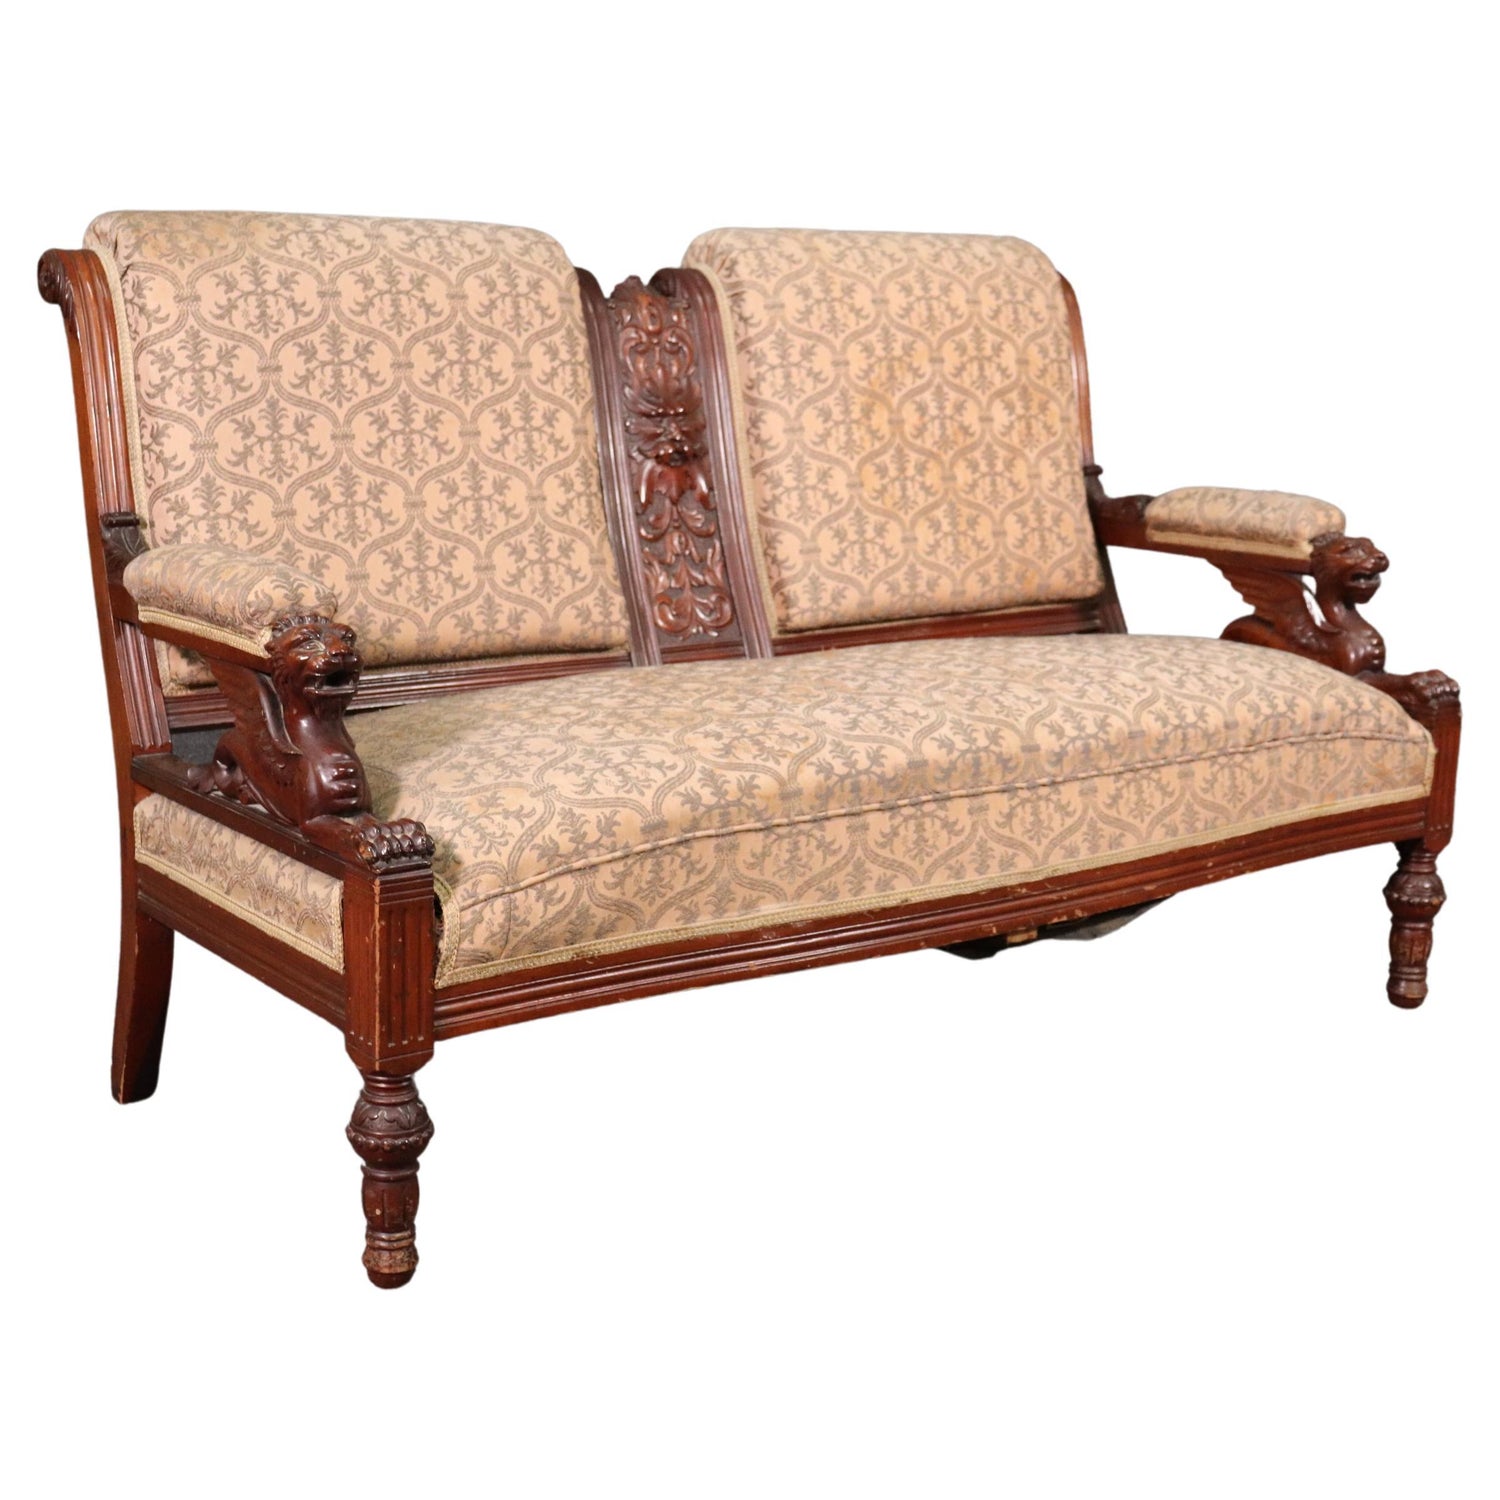 1870s Sofas - 18 For Sale at 1stDibs | rosewood chesterfield sofa